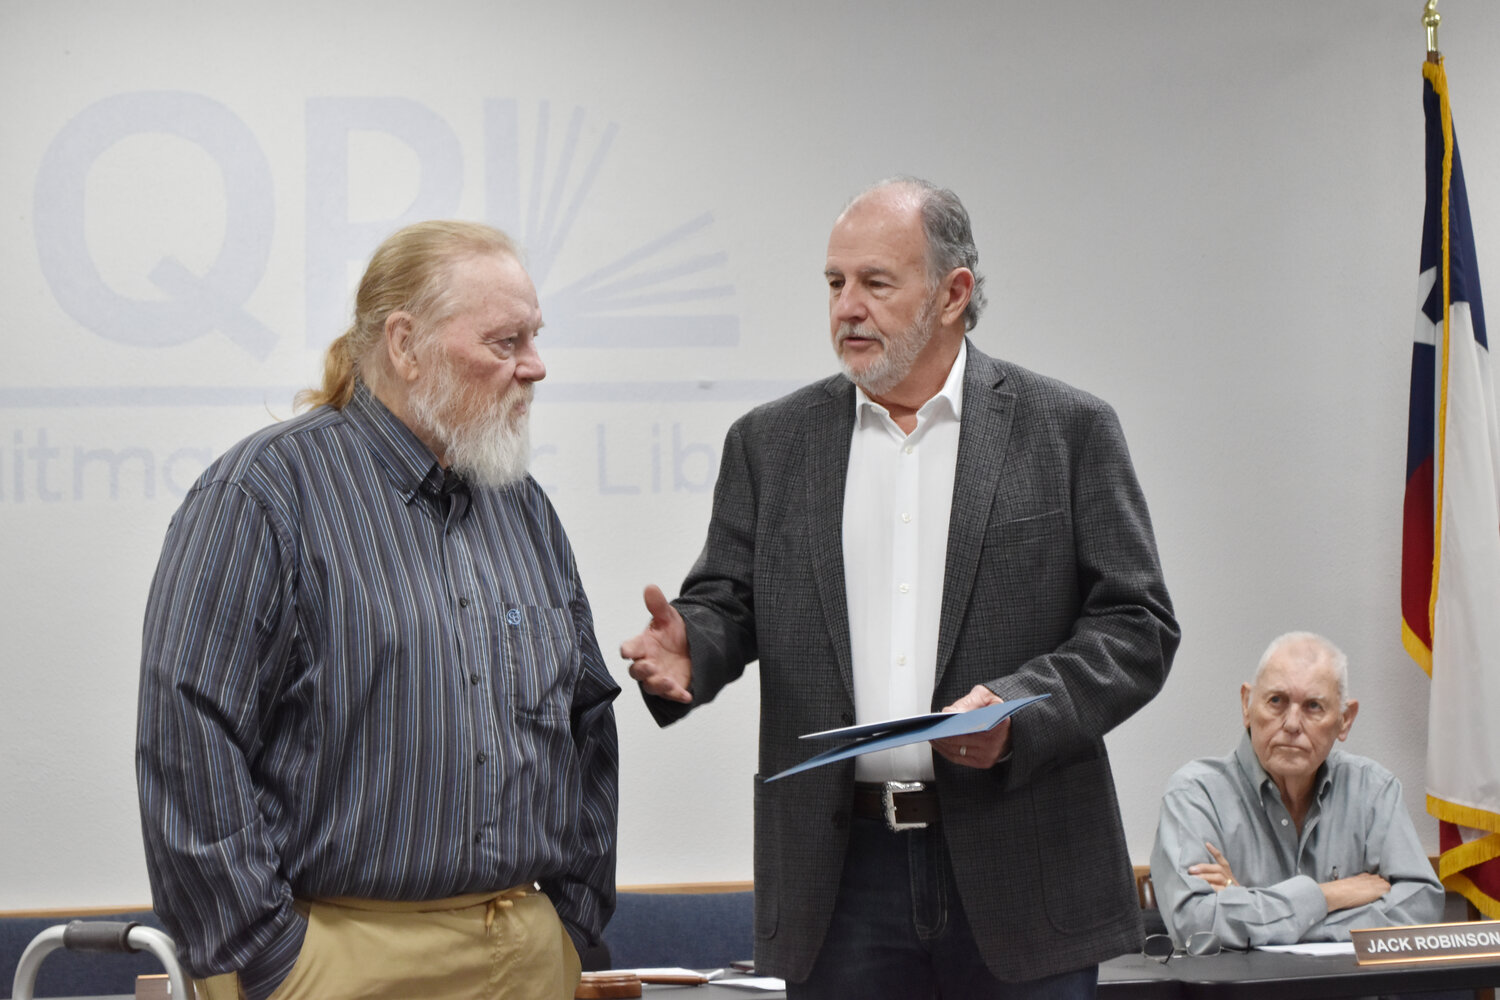 Quitman Mayor Randy Dunn (right) speaks about Larry Tucker during Thursday’s Quitman City Council meeting, where Tucker was honored for his years of community service.